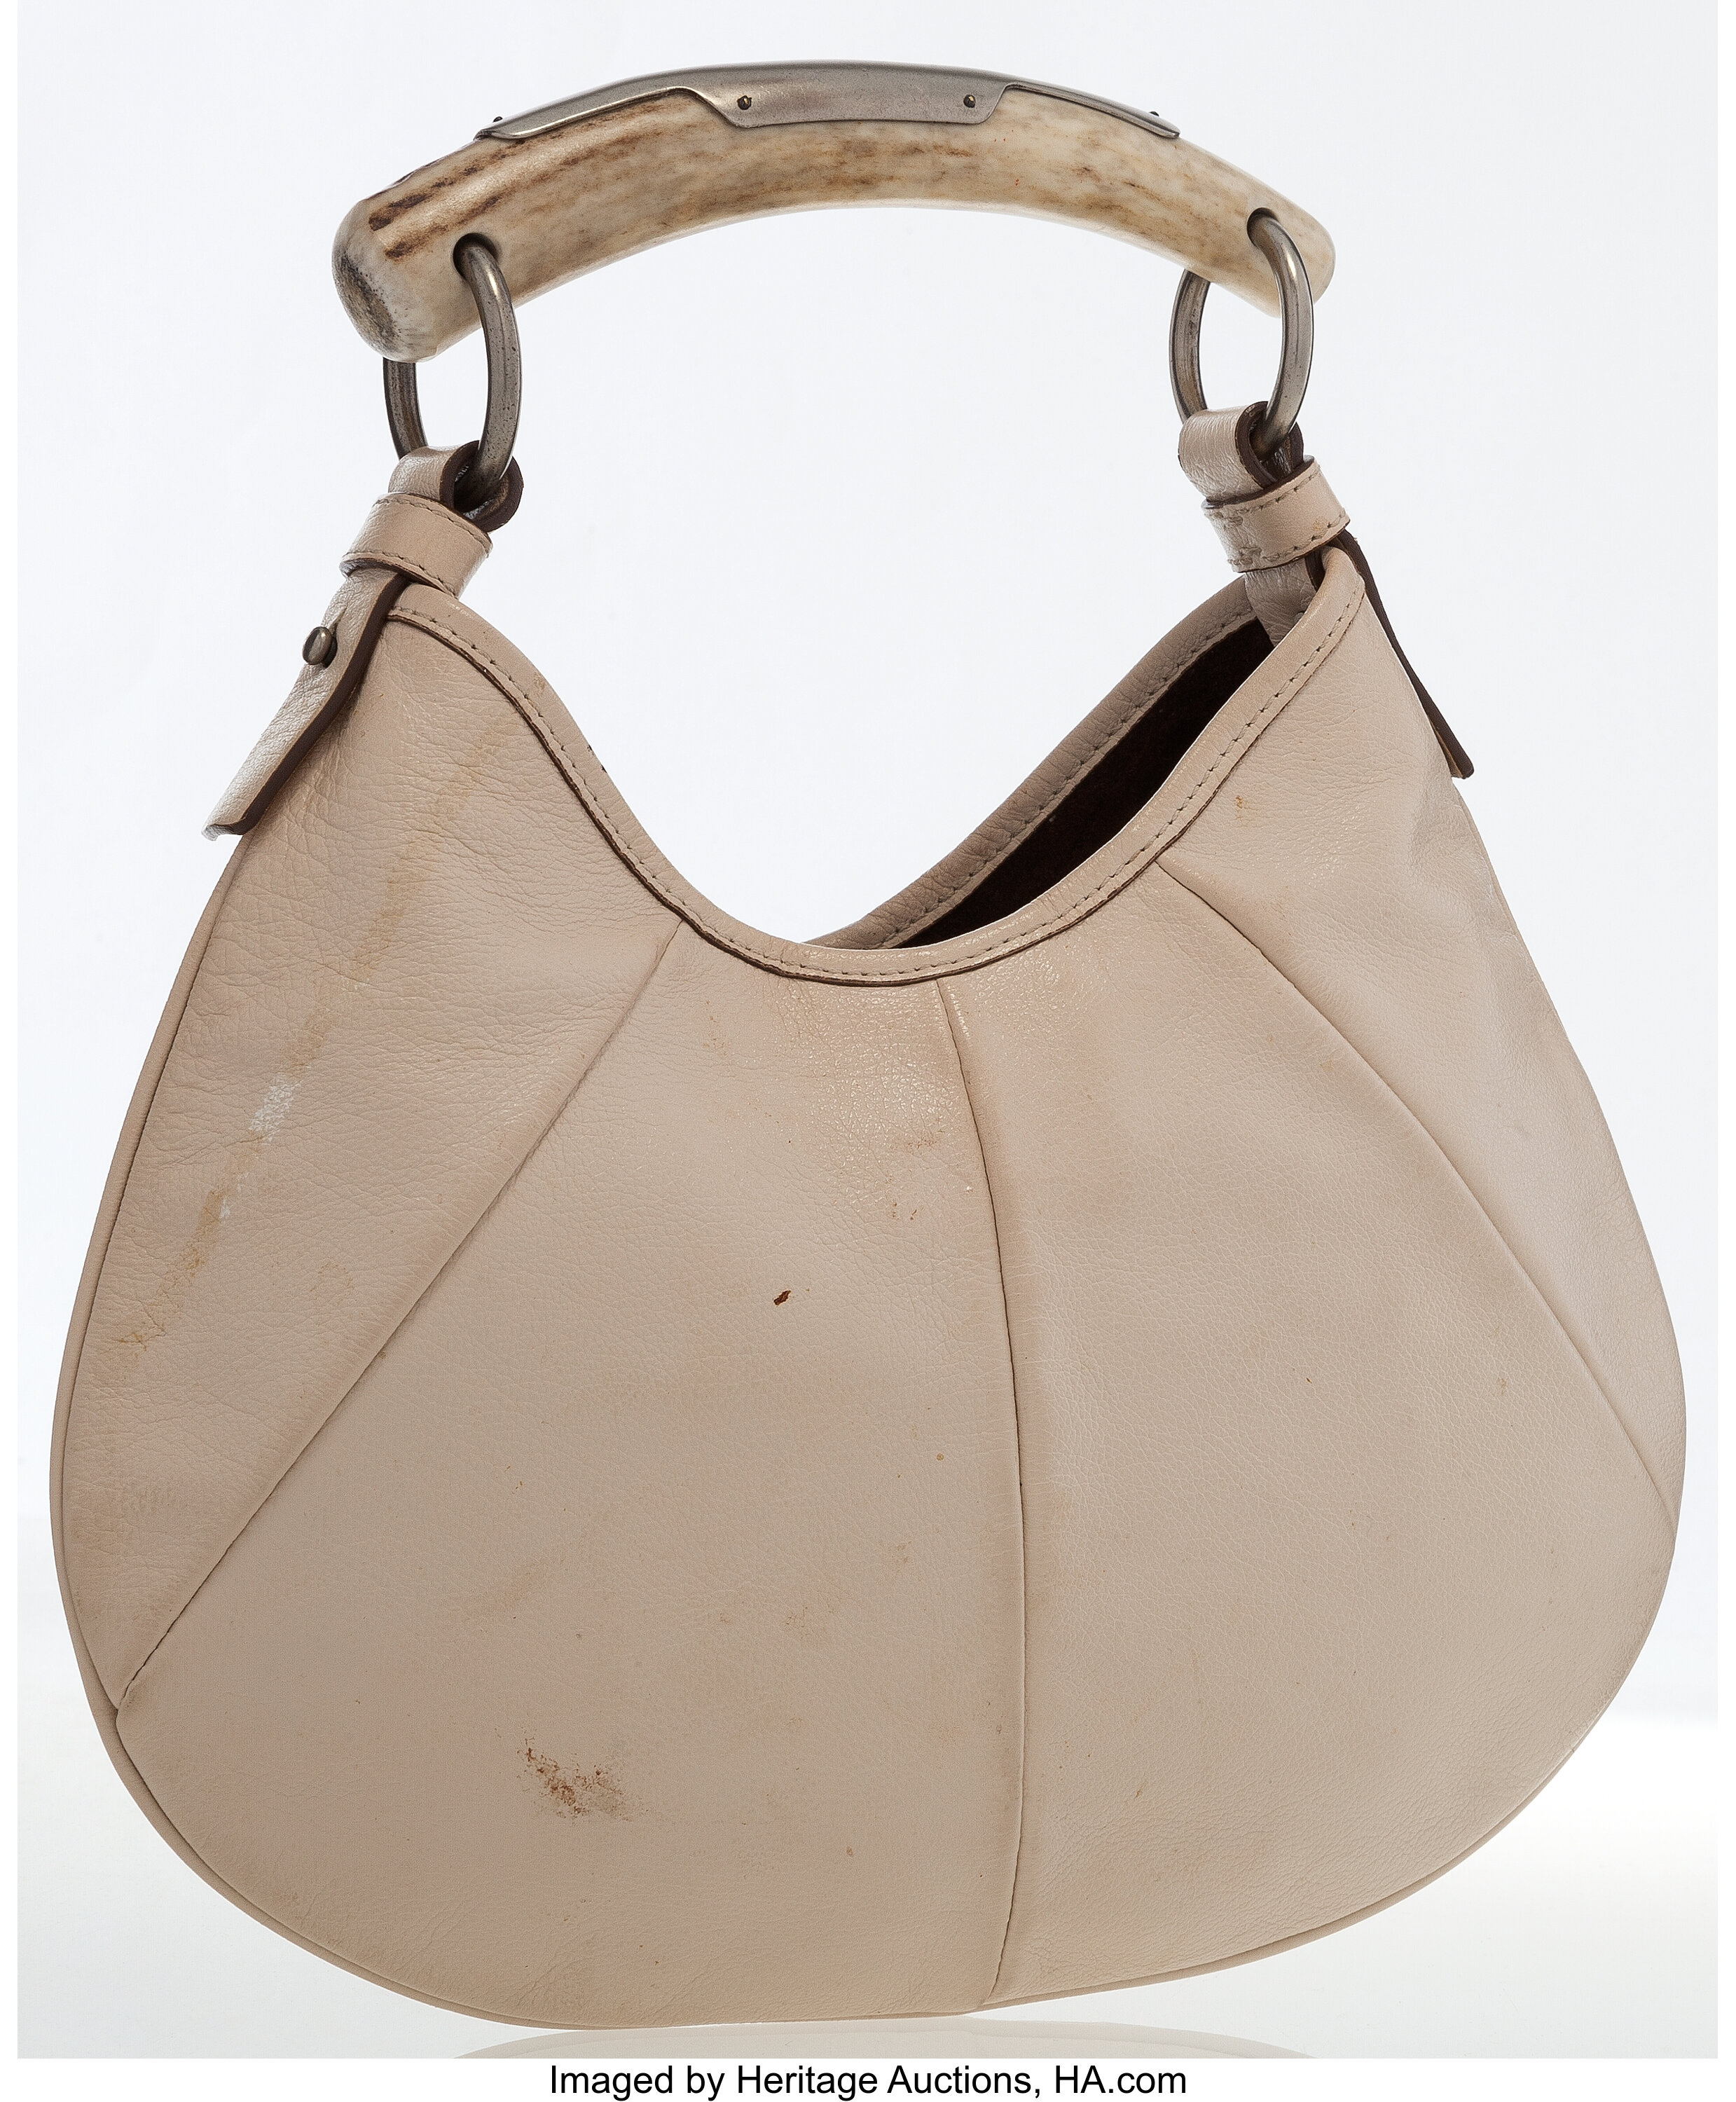 Yves Saint Laurent Beige Leather Mombasa Bag by Tom Ford. , Lot #18074